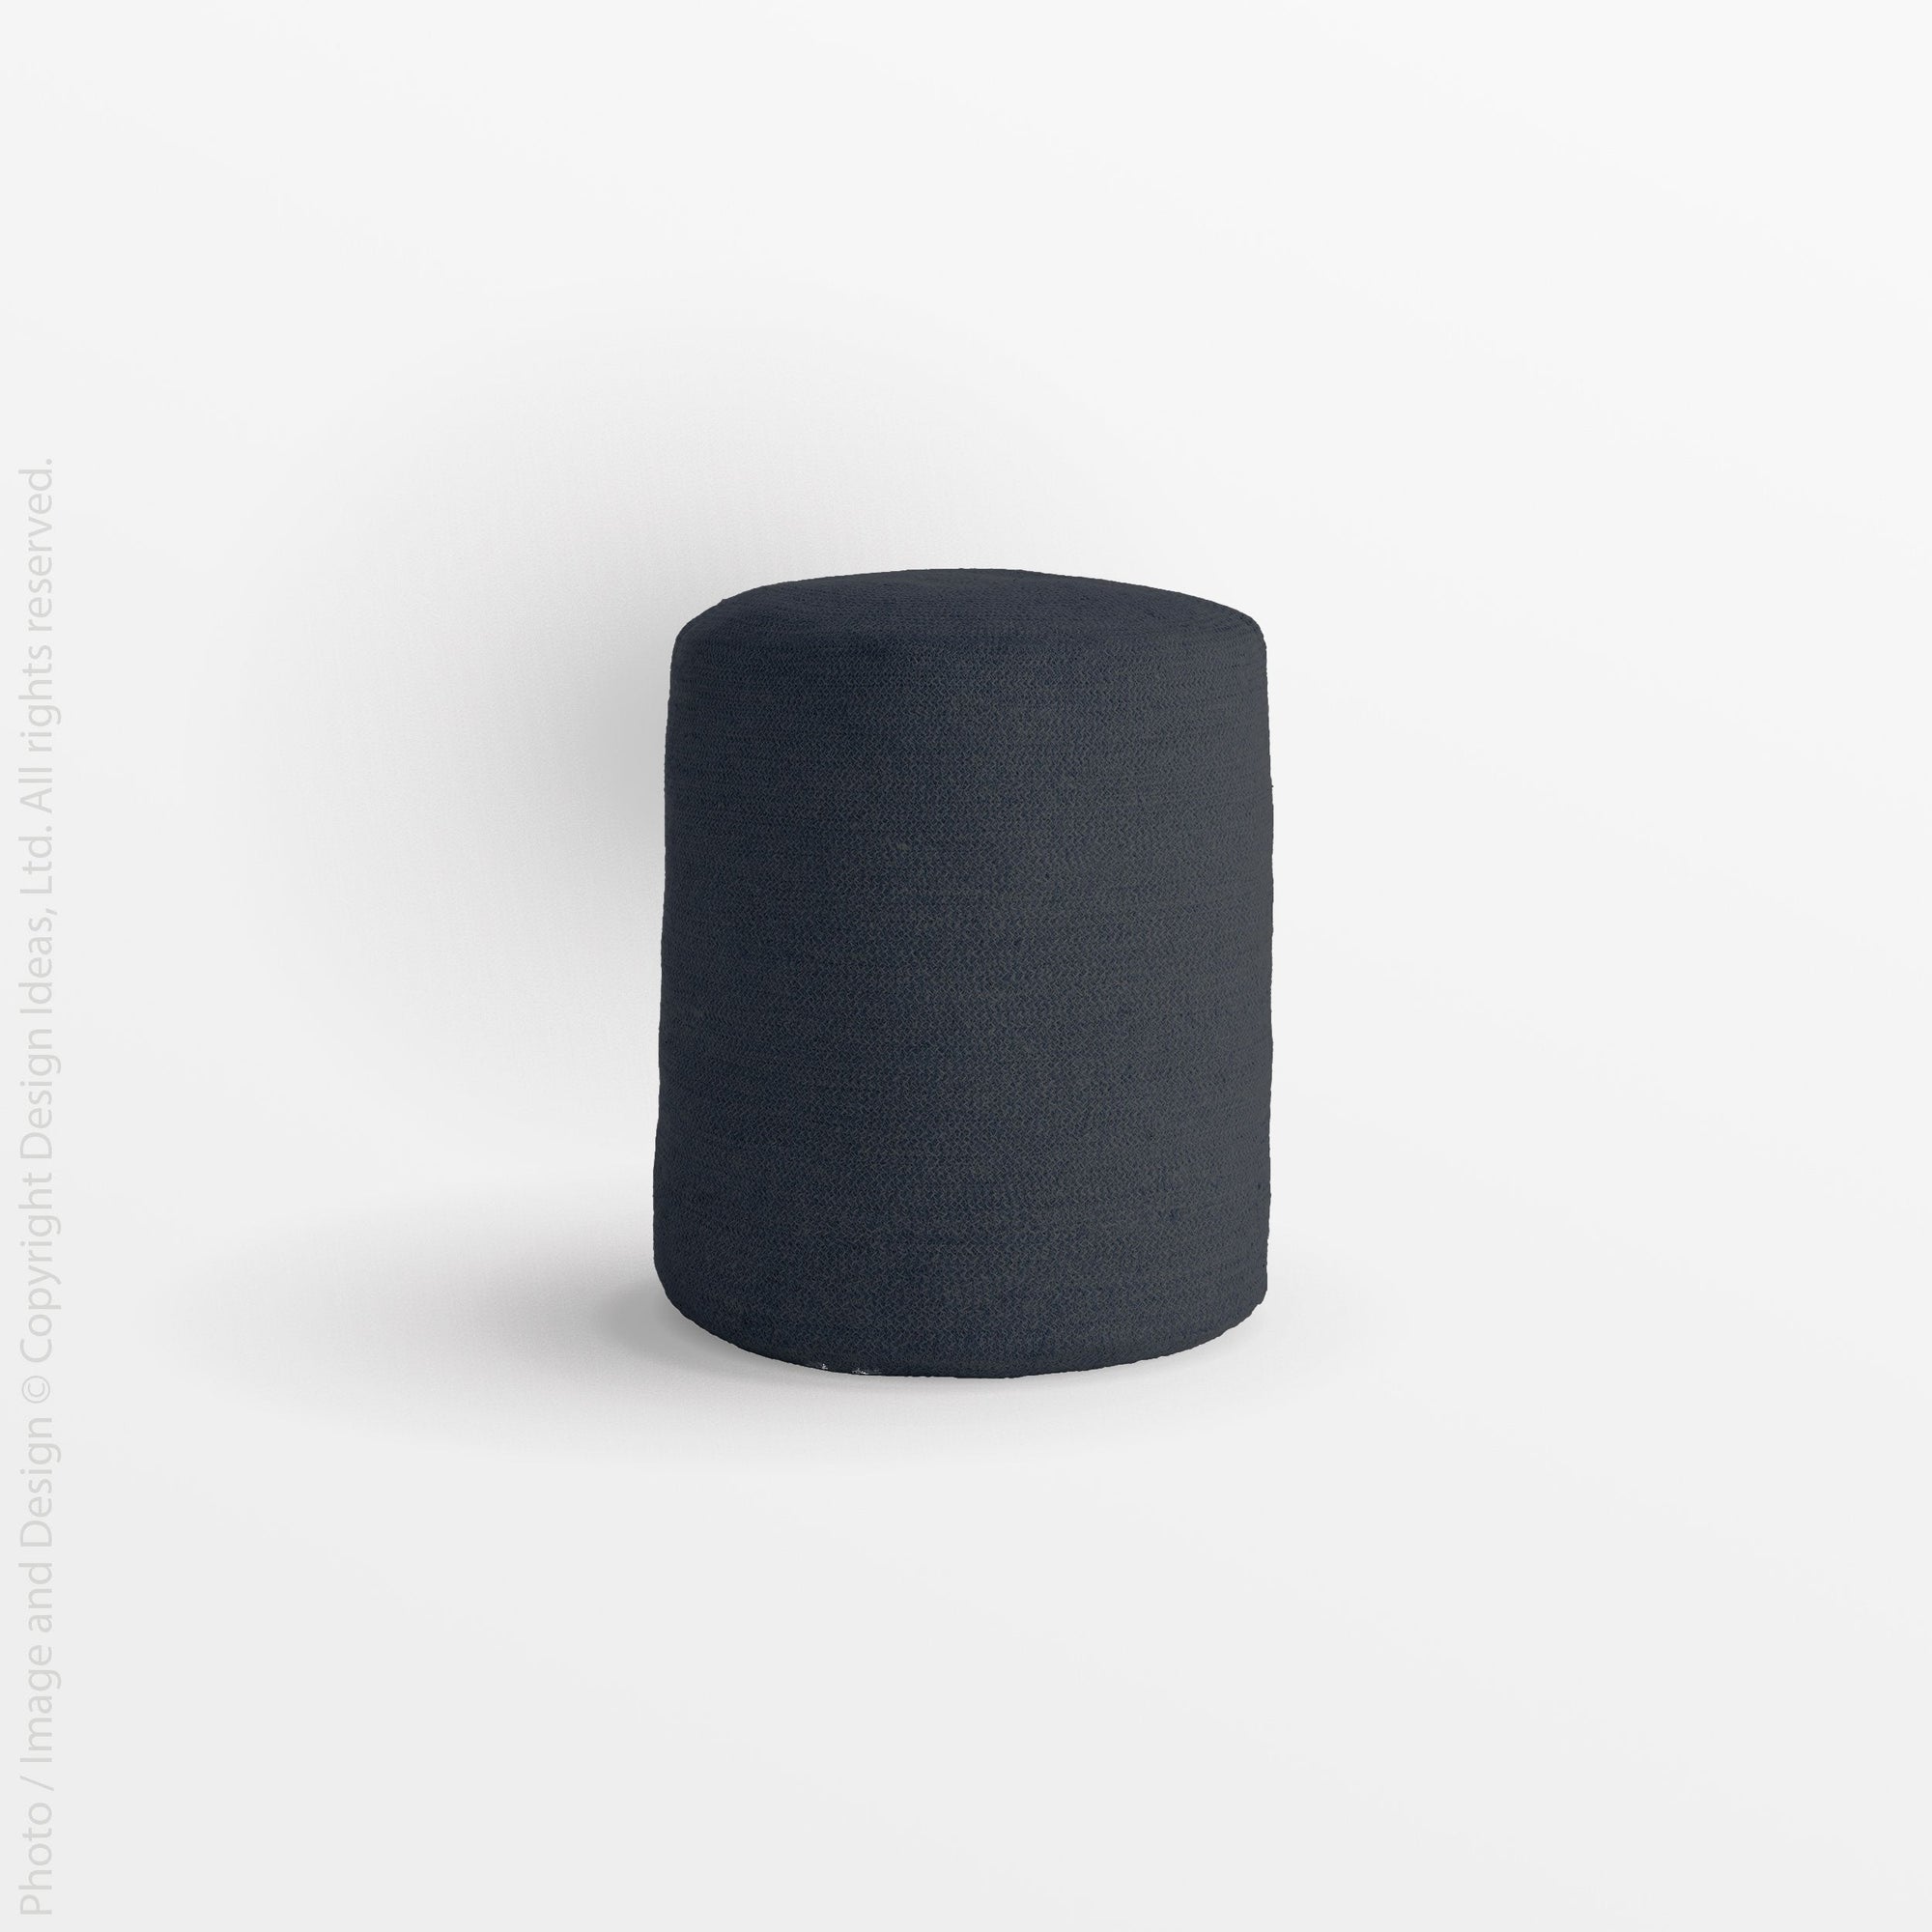 Melia™ pouf (narrow) - Black | Image 3 | Premium Ottoman from the Melia collection | made with Jute for long lasting use | texxture